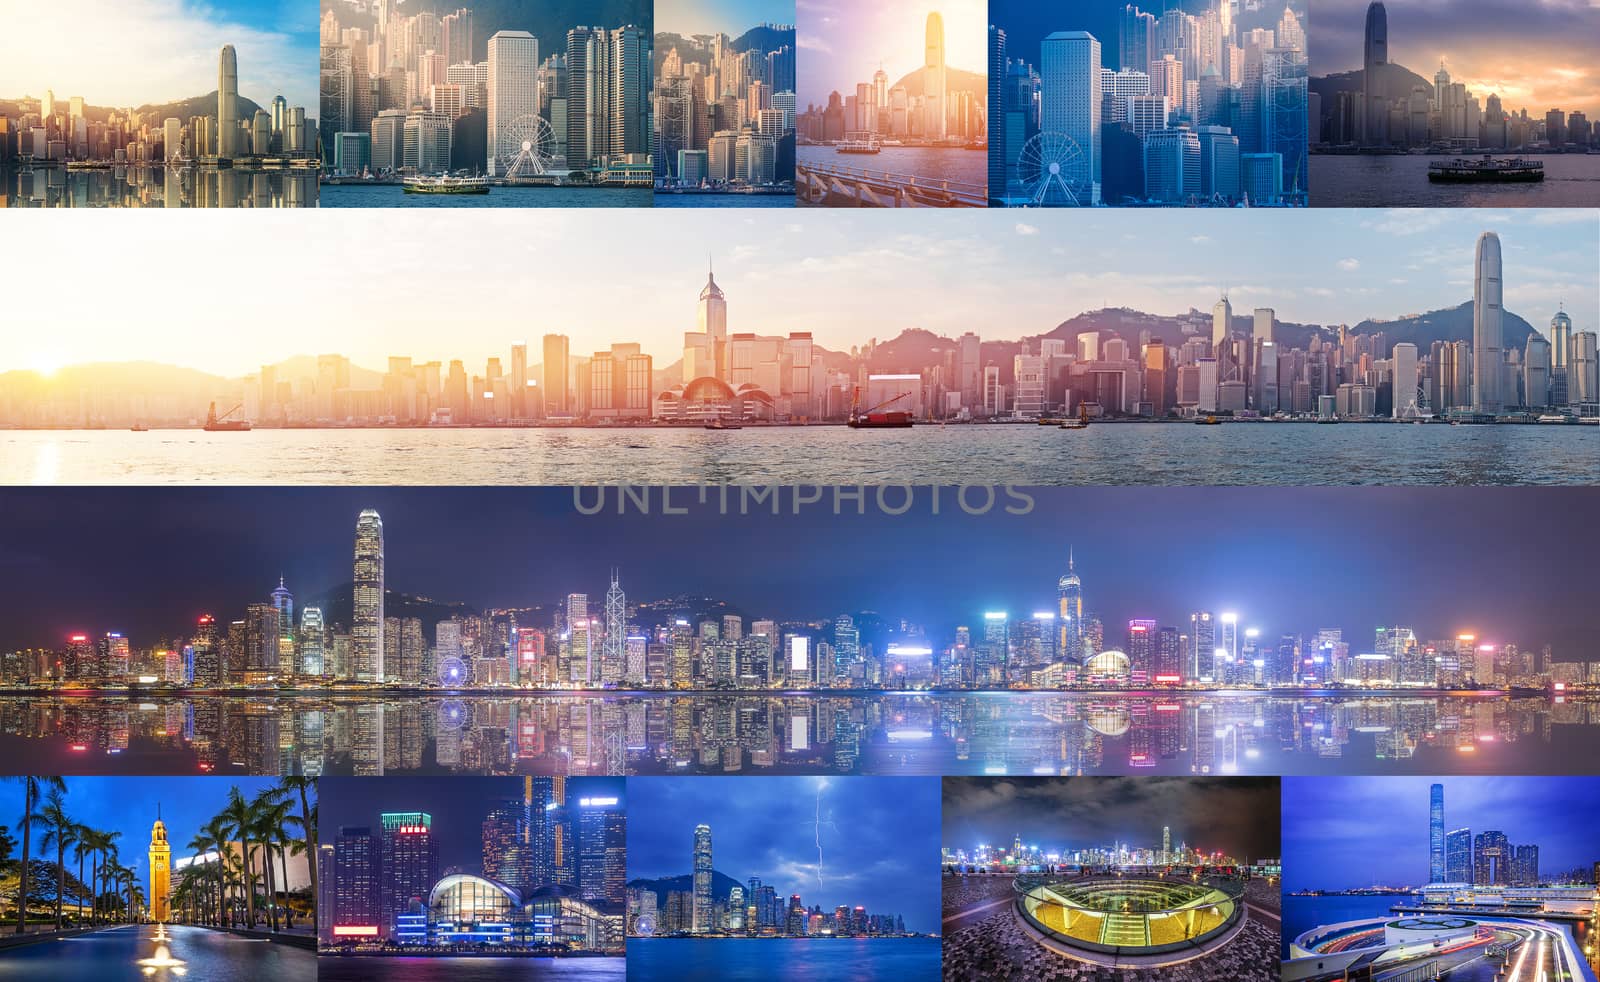 Panoramic views of Victoria Harbour from day to night